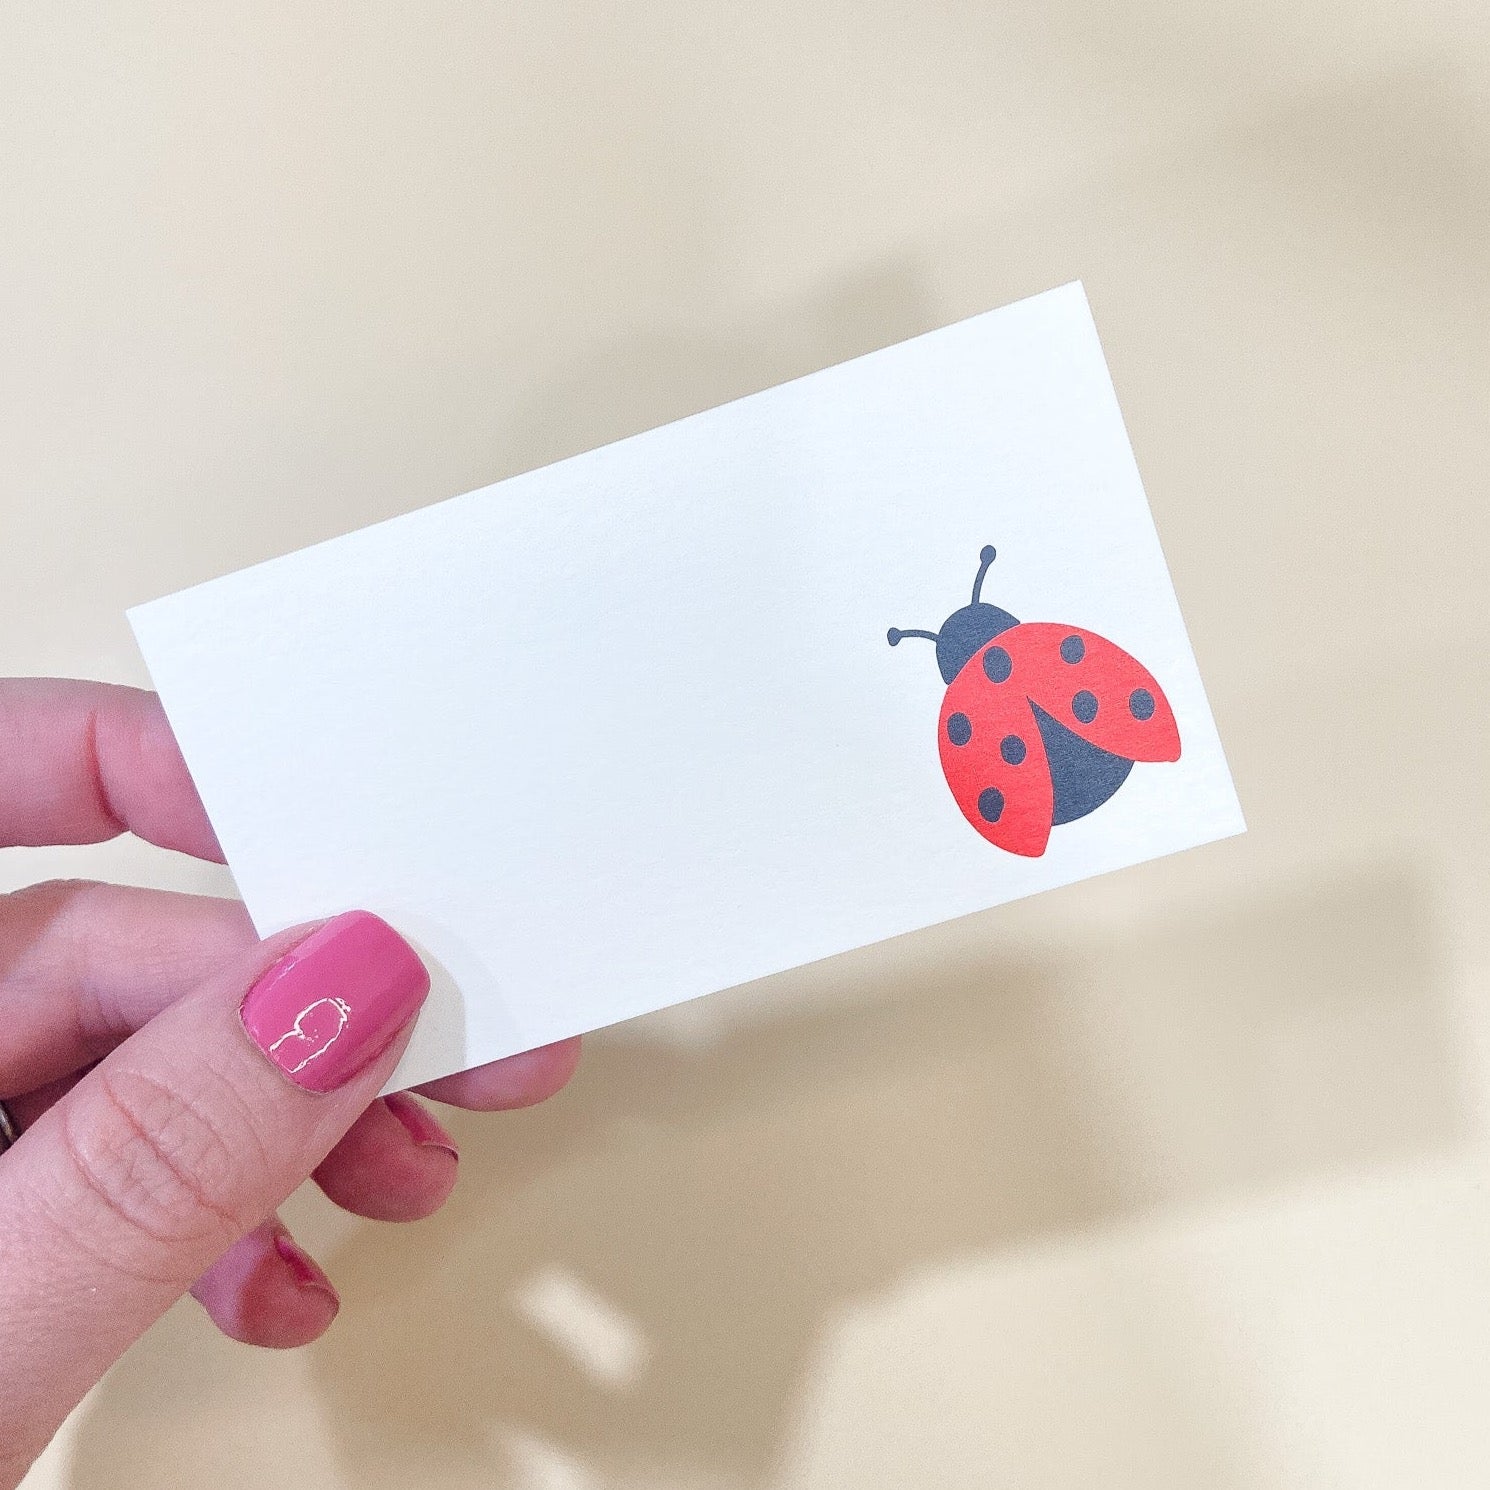 This collection features charming cards measuring 3.5"x2". They are the perfect size to slip into a lunchbox, attach to a gift, or tuck into the pocket of a loved one. The Lady Bug Bitty Note is a simple and sweet addition to any bitty message. 